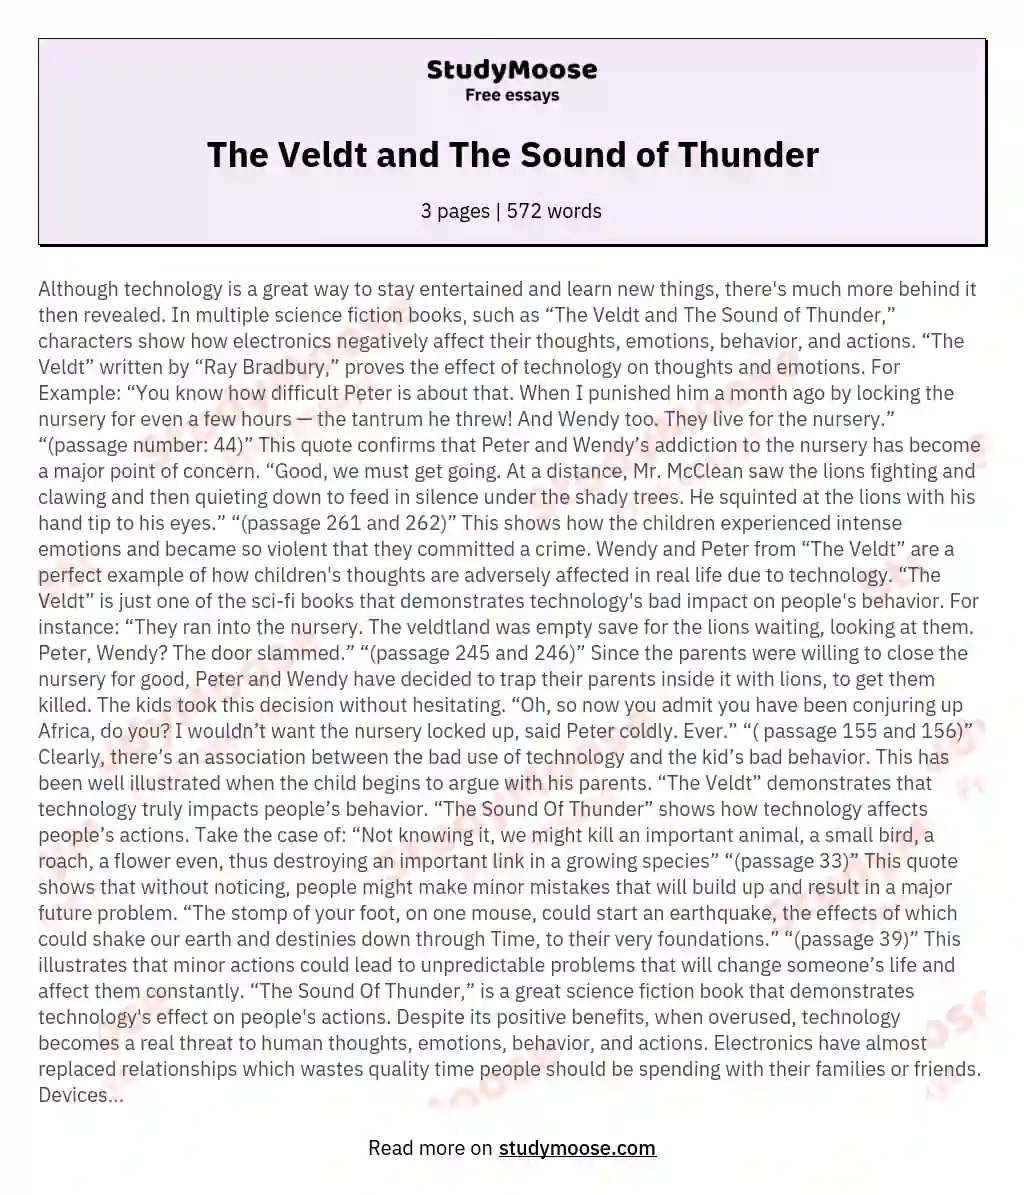 The Veldt and The Sound of Thunder essay